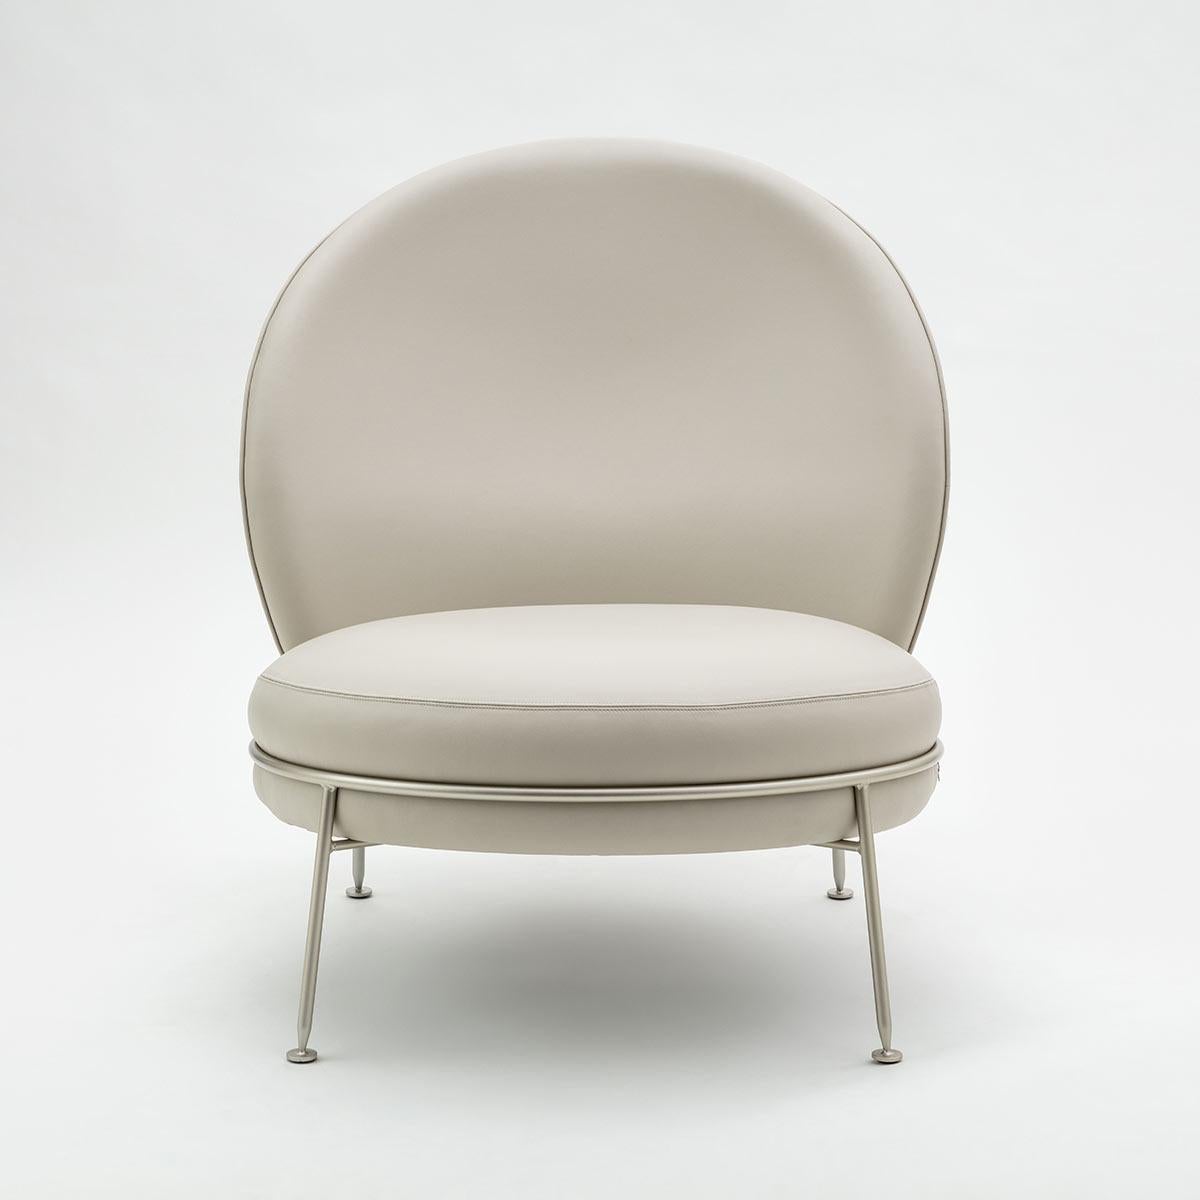 Other Fantastic Armchair Leather Champagne Satined Lacquer Finishing Amaretto Collec For Sale